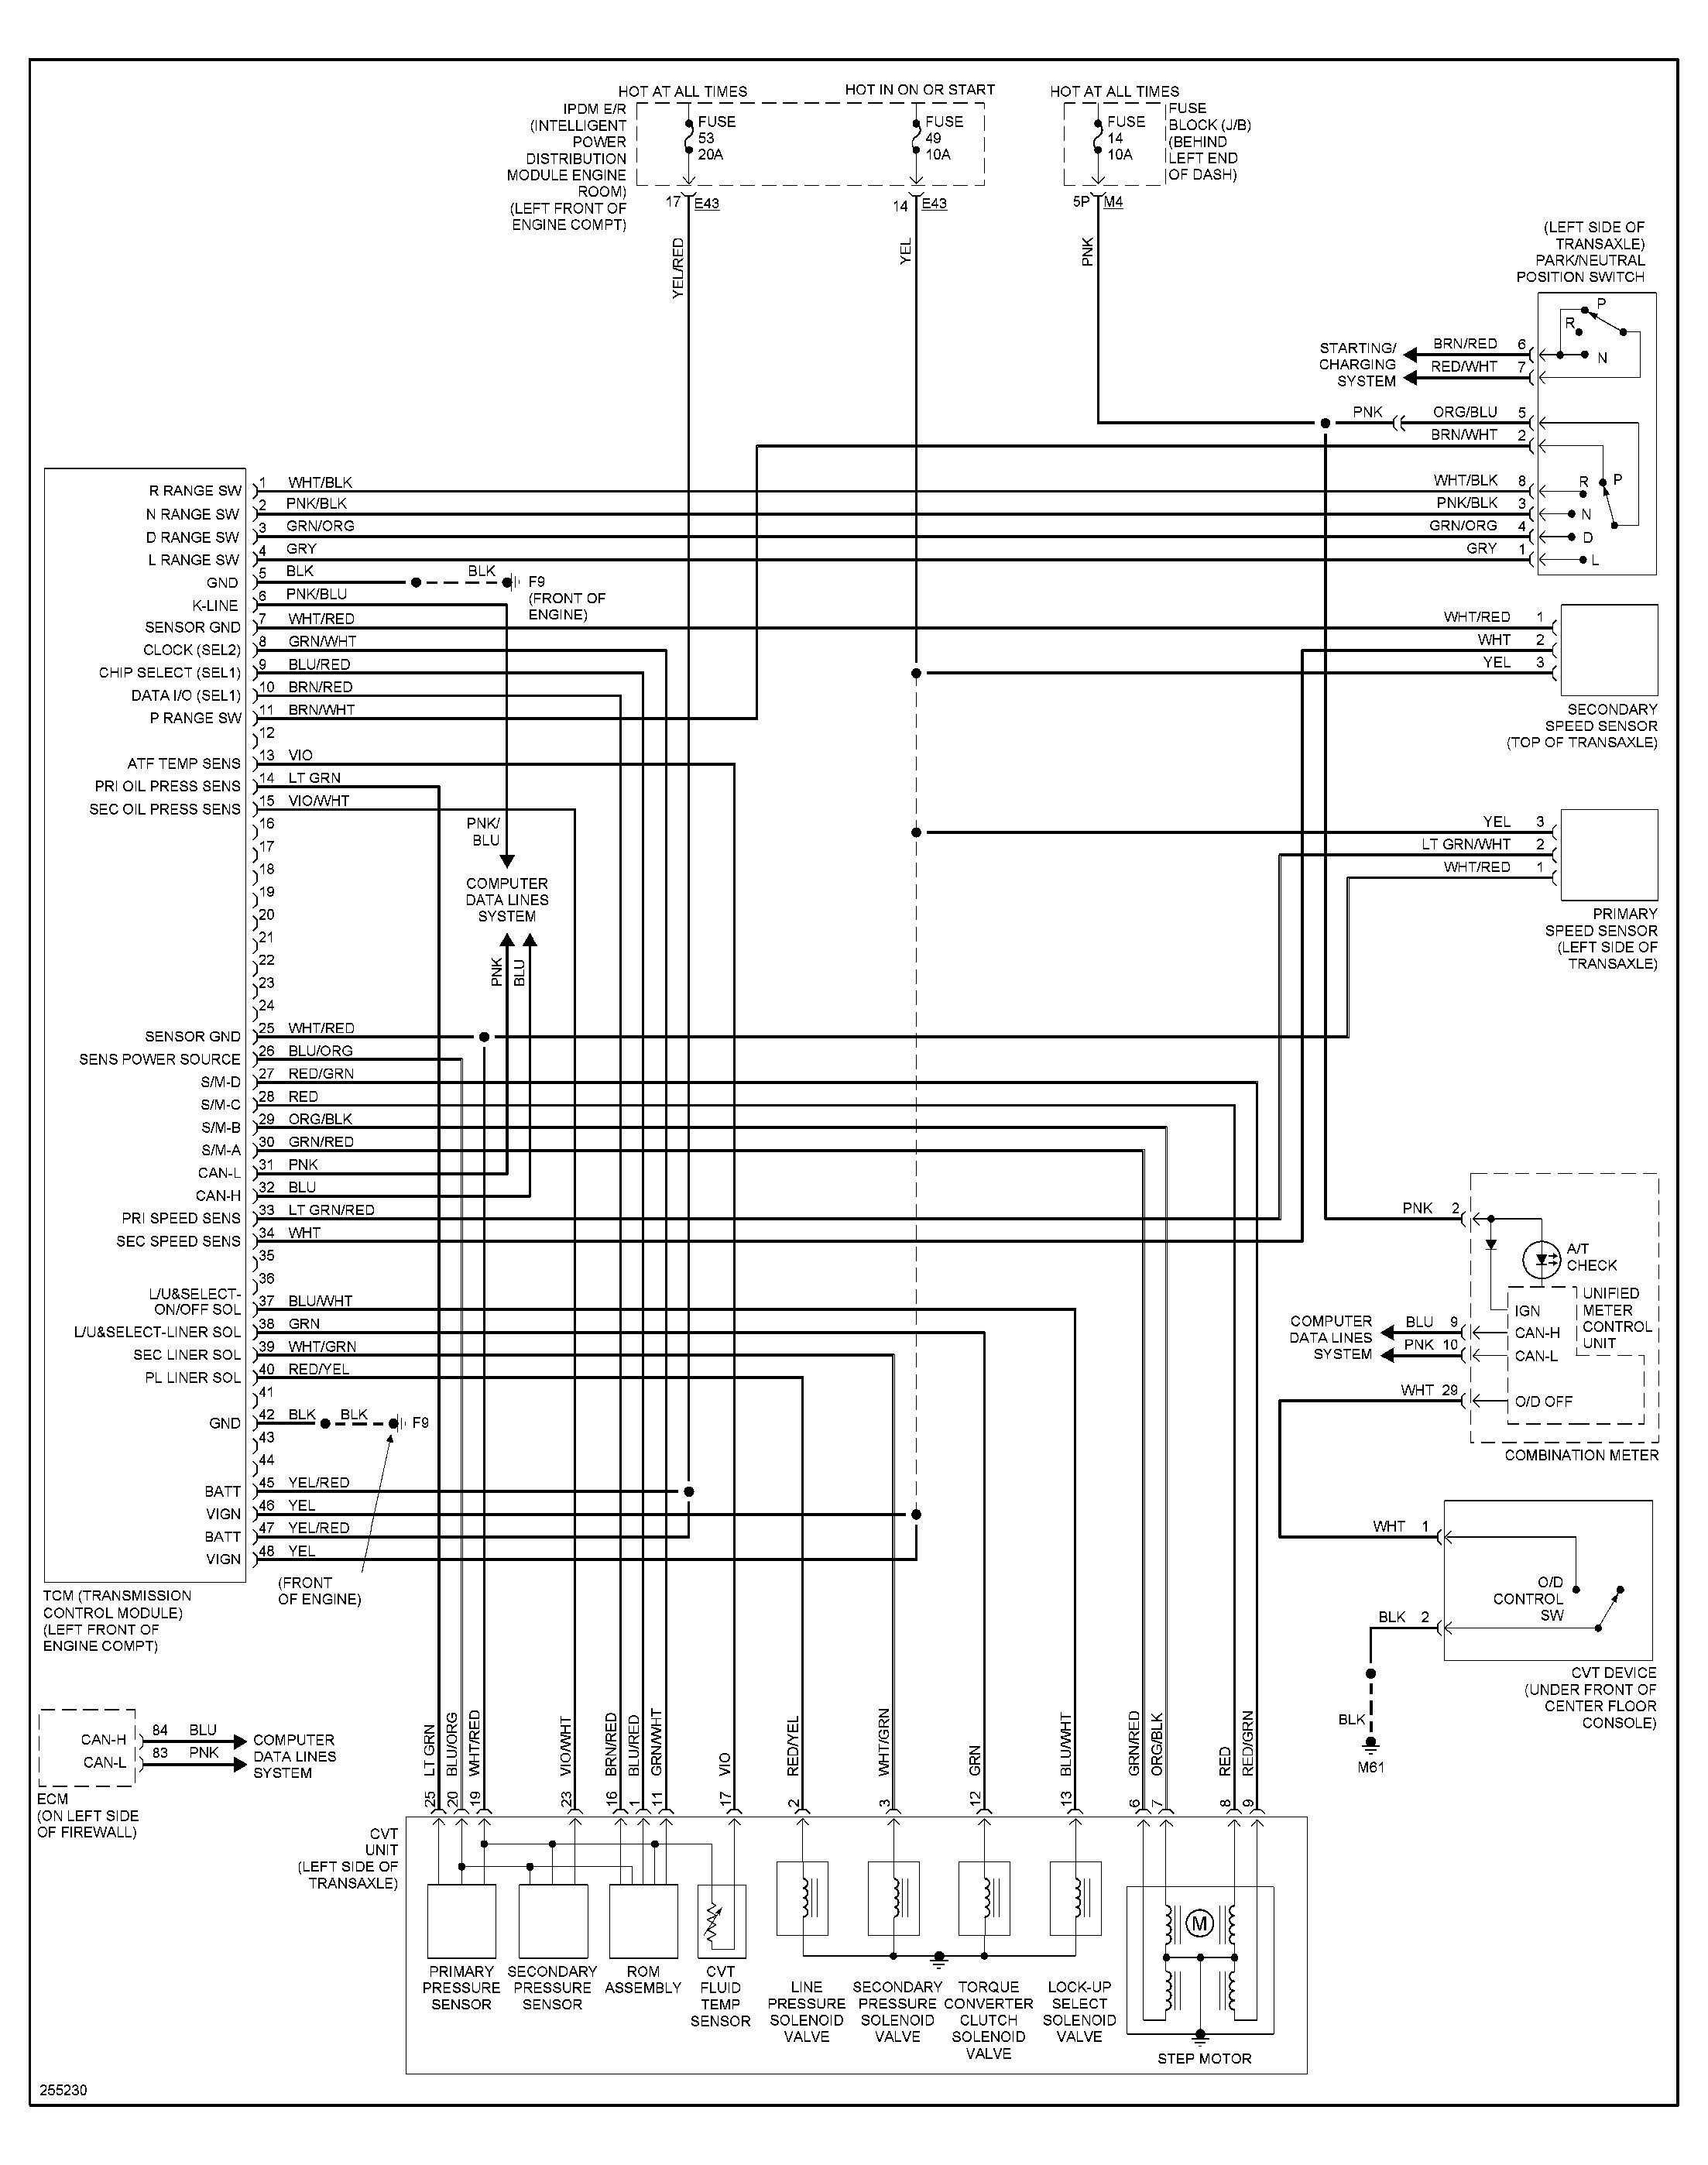 2005 Nissan Sentra Engine Diagram 98 Sentra Engine Diagram Another Blog About Wiring Diagram •